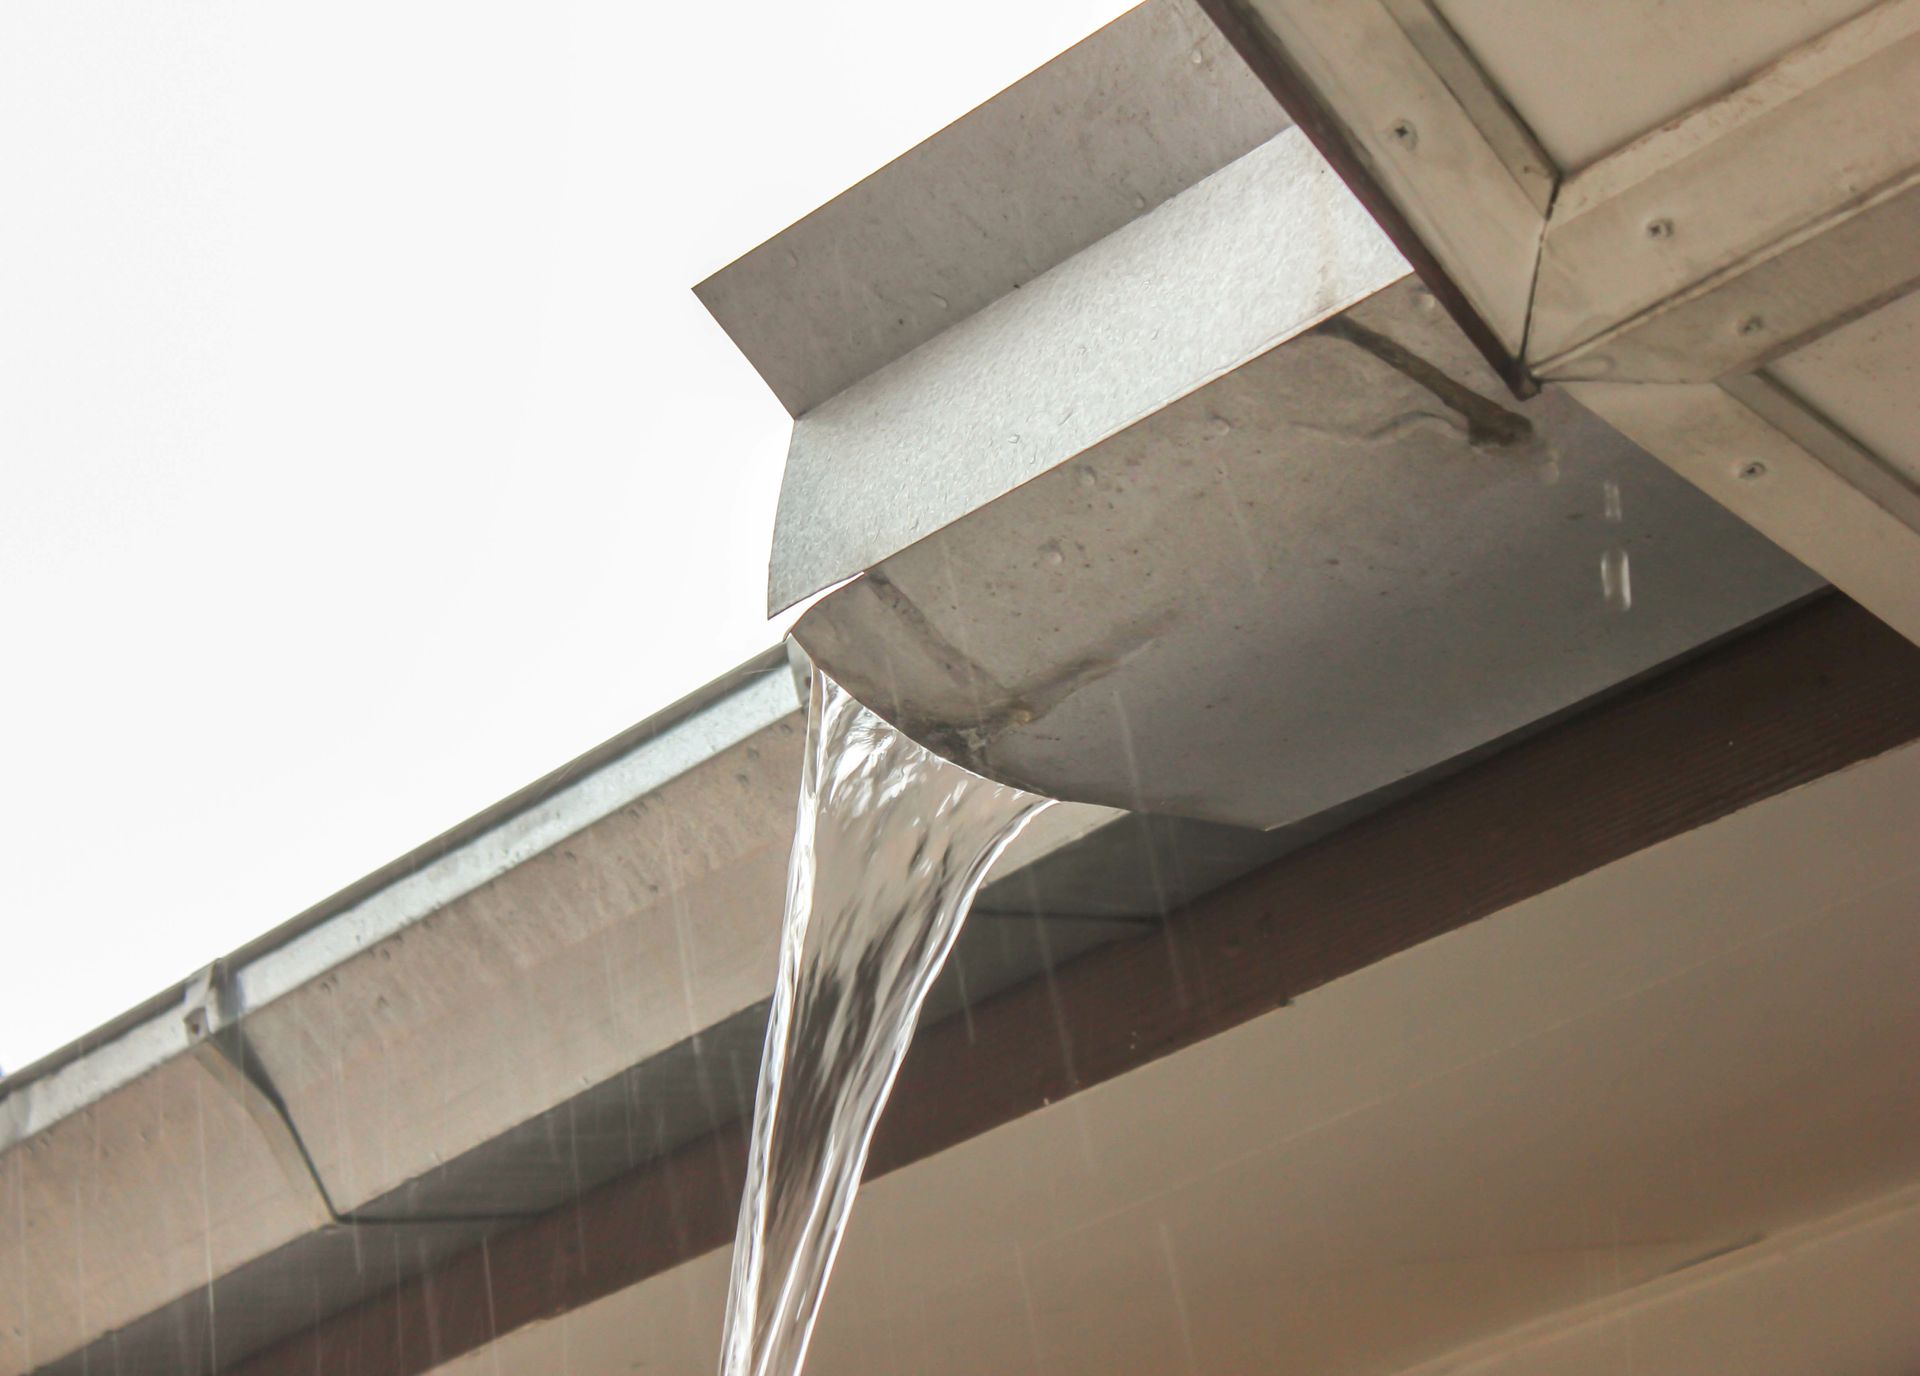 clogged or damaged gutters causing leaks in basements